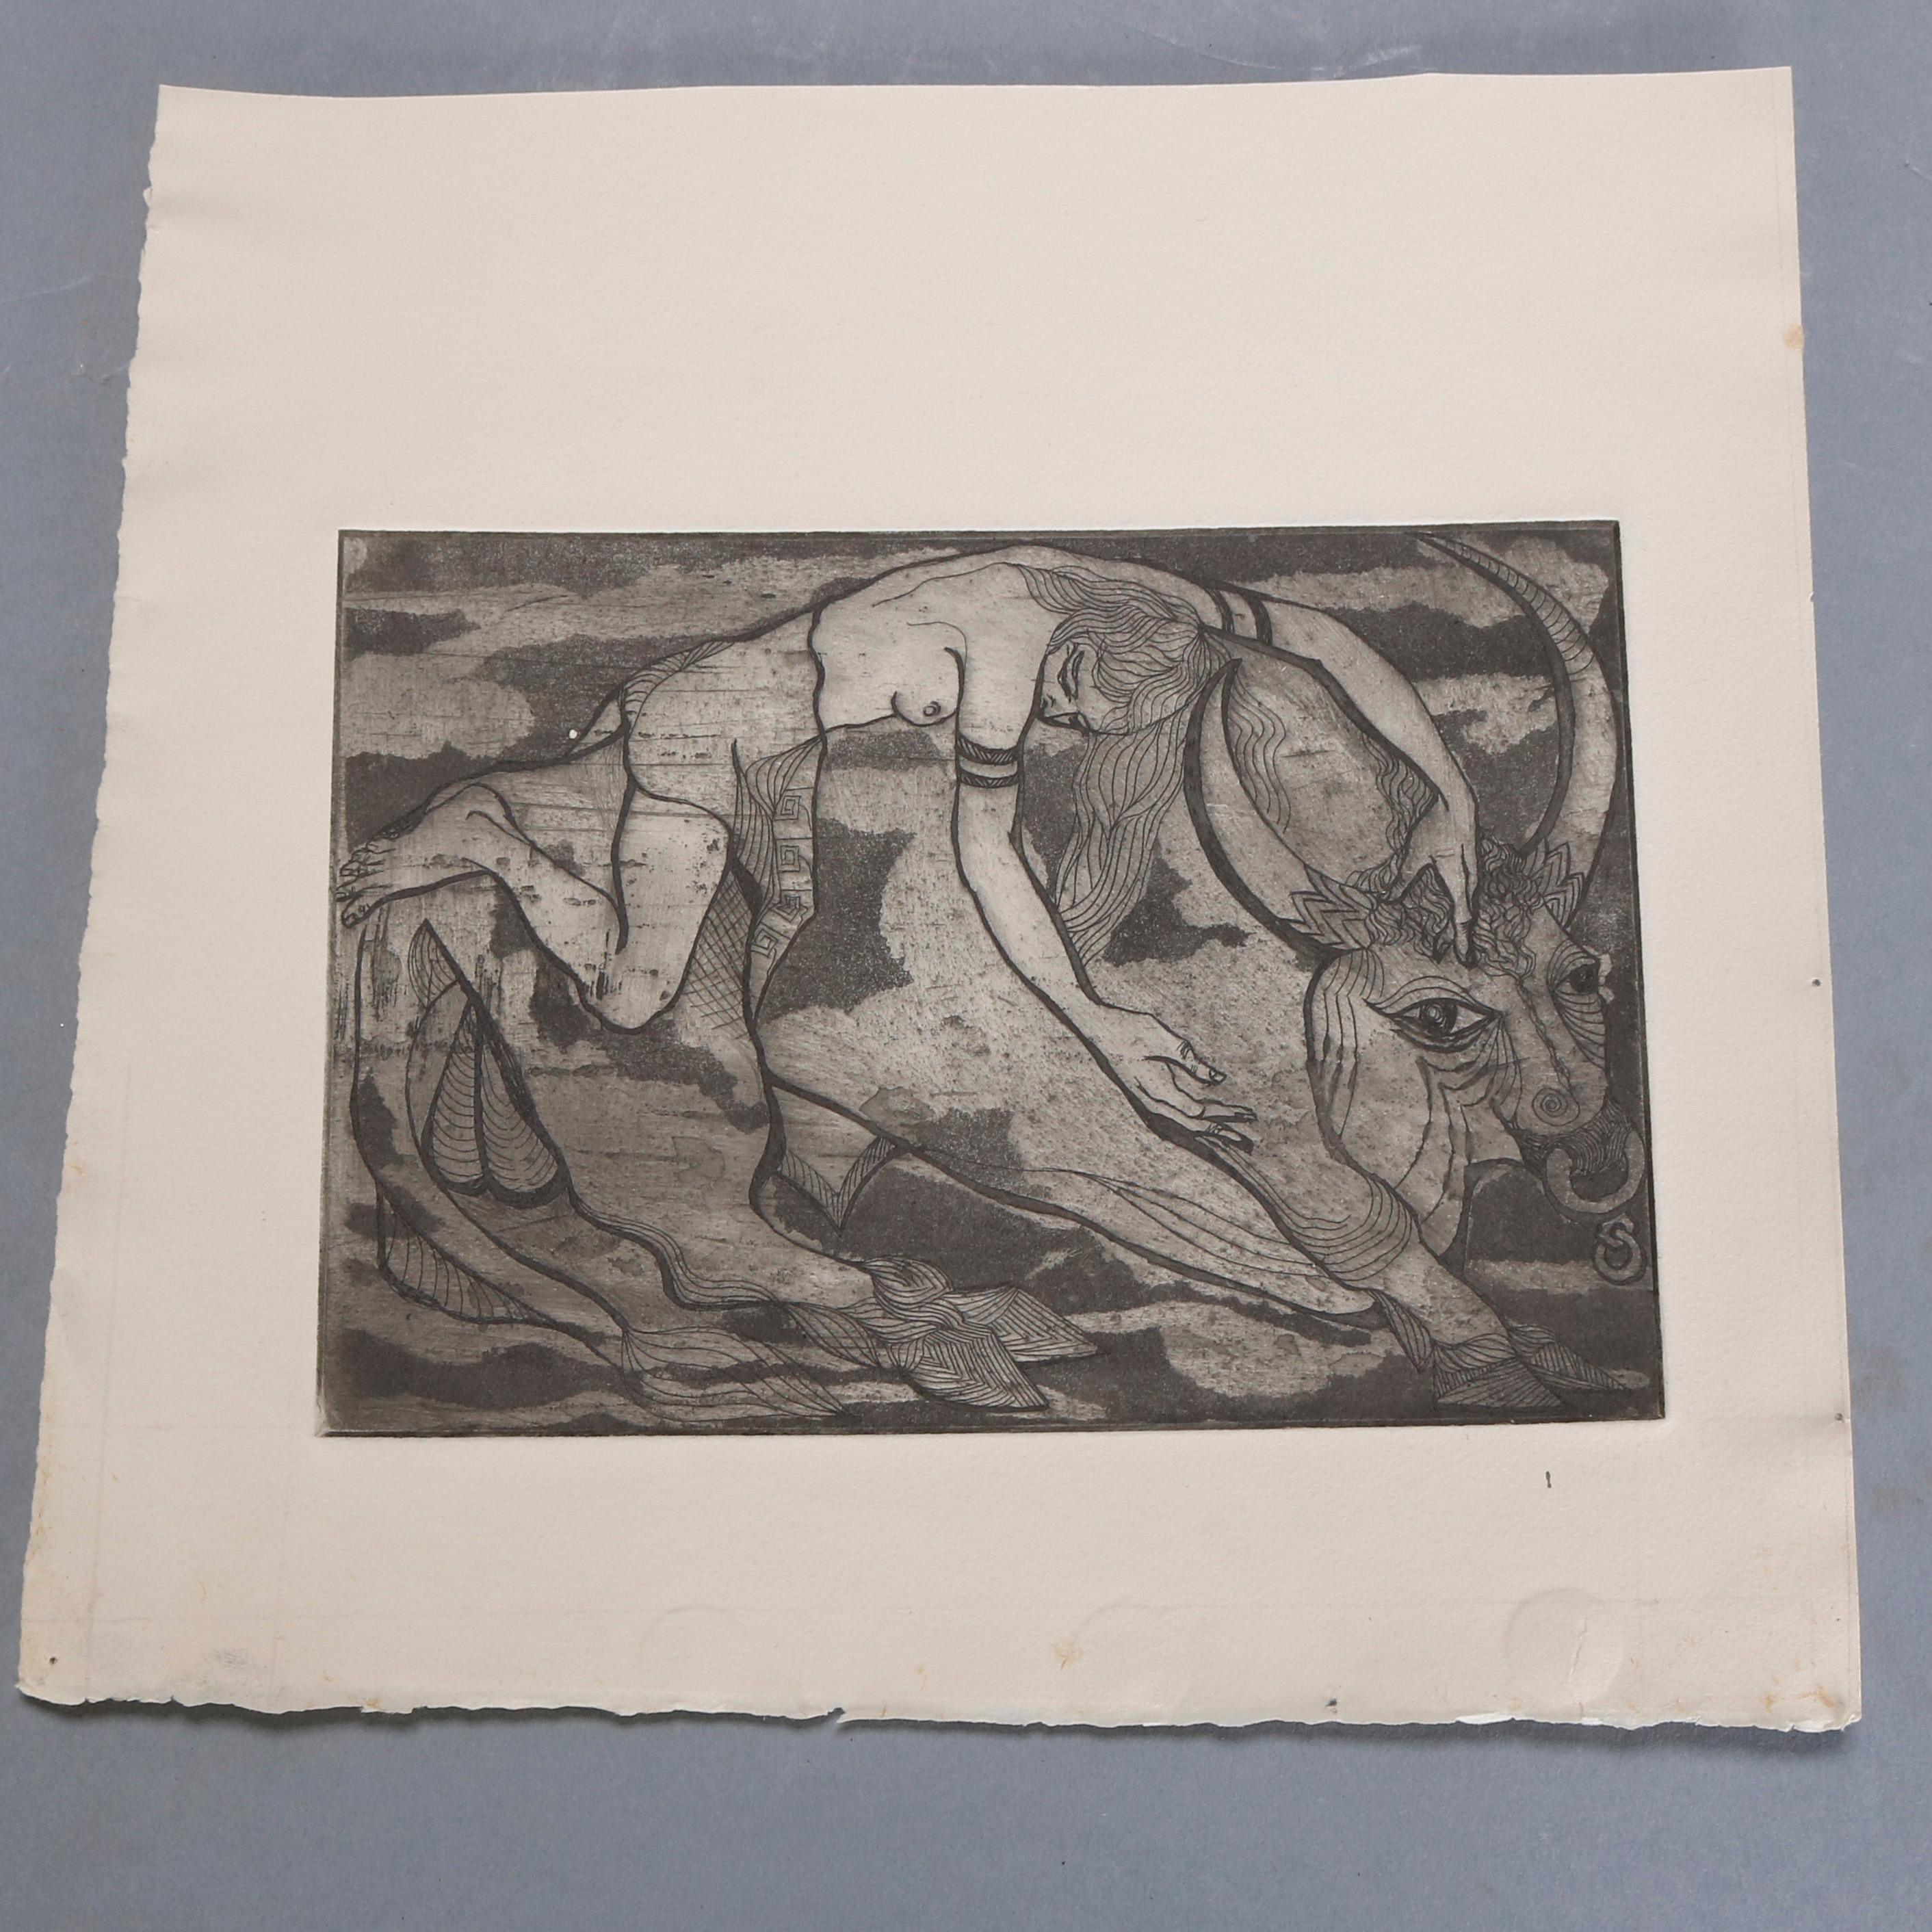 A collection of 4 James Joseph Kearns Expressionist lithographs depict figures in various settings, circa 1954


Measures: 1: 11.5